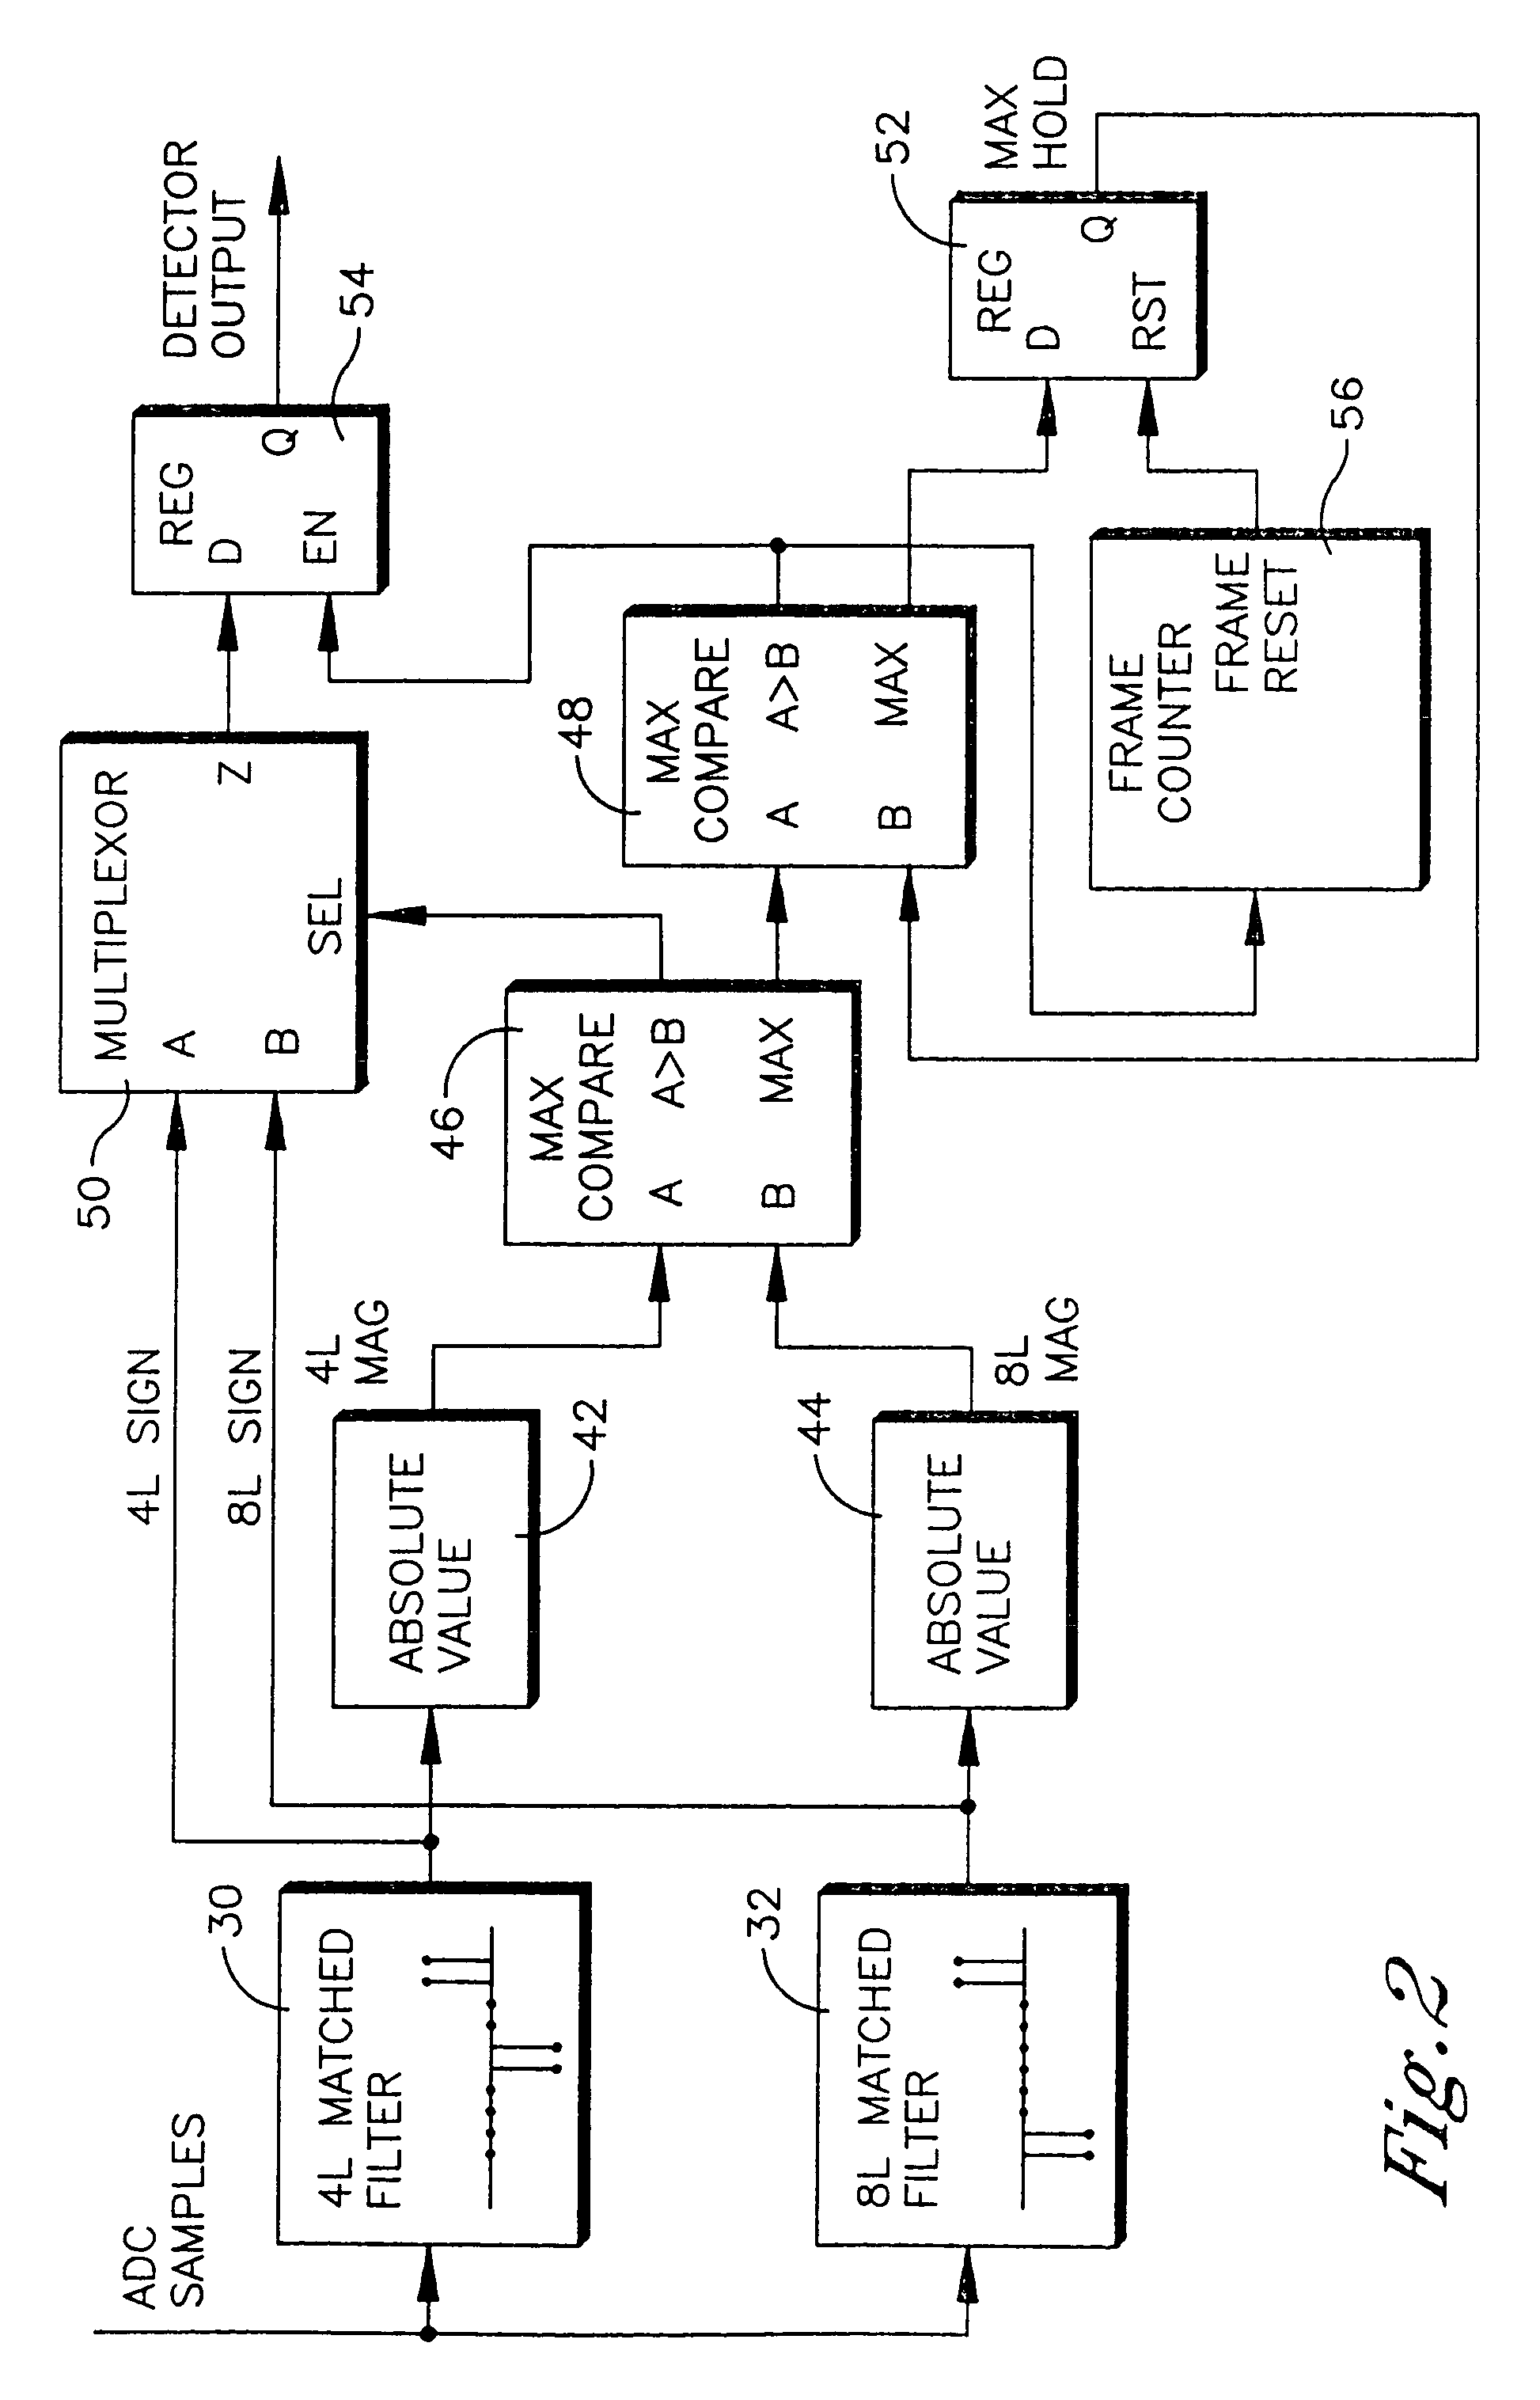 Biphase magnetic pattern detector using multiple matched filters for hard disk drive